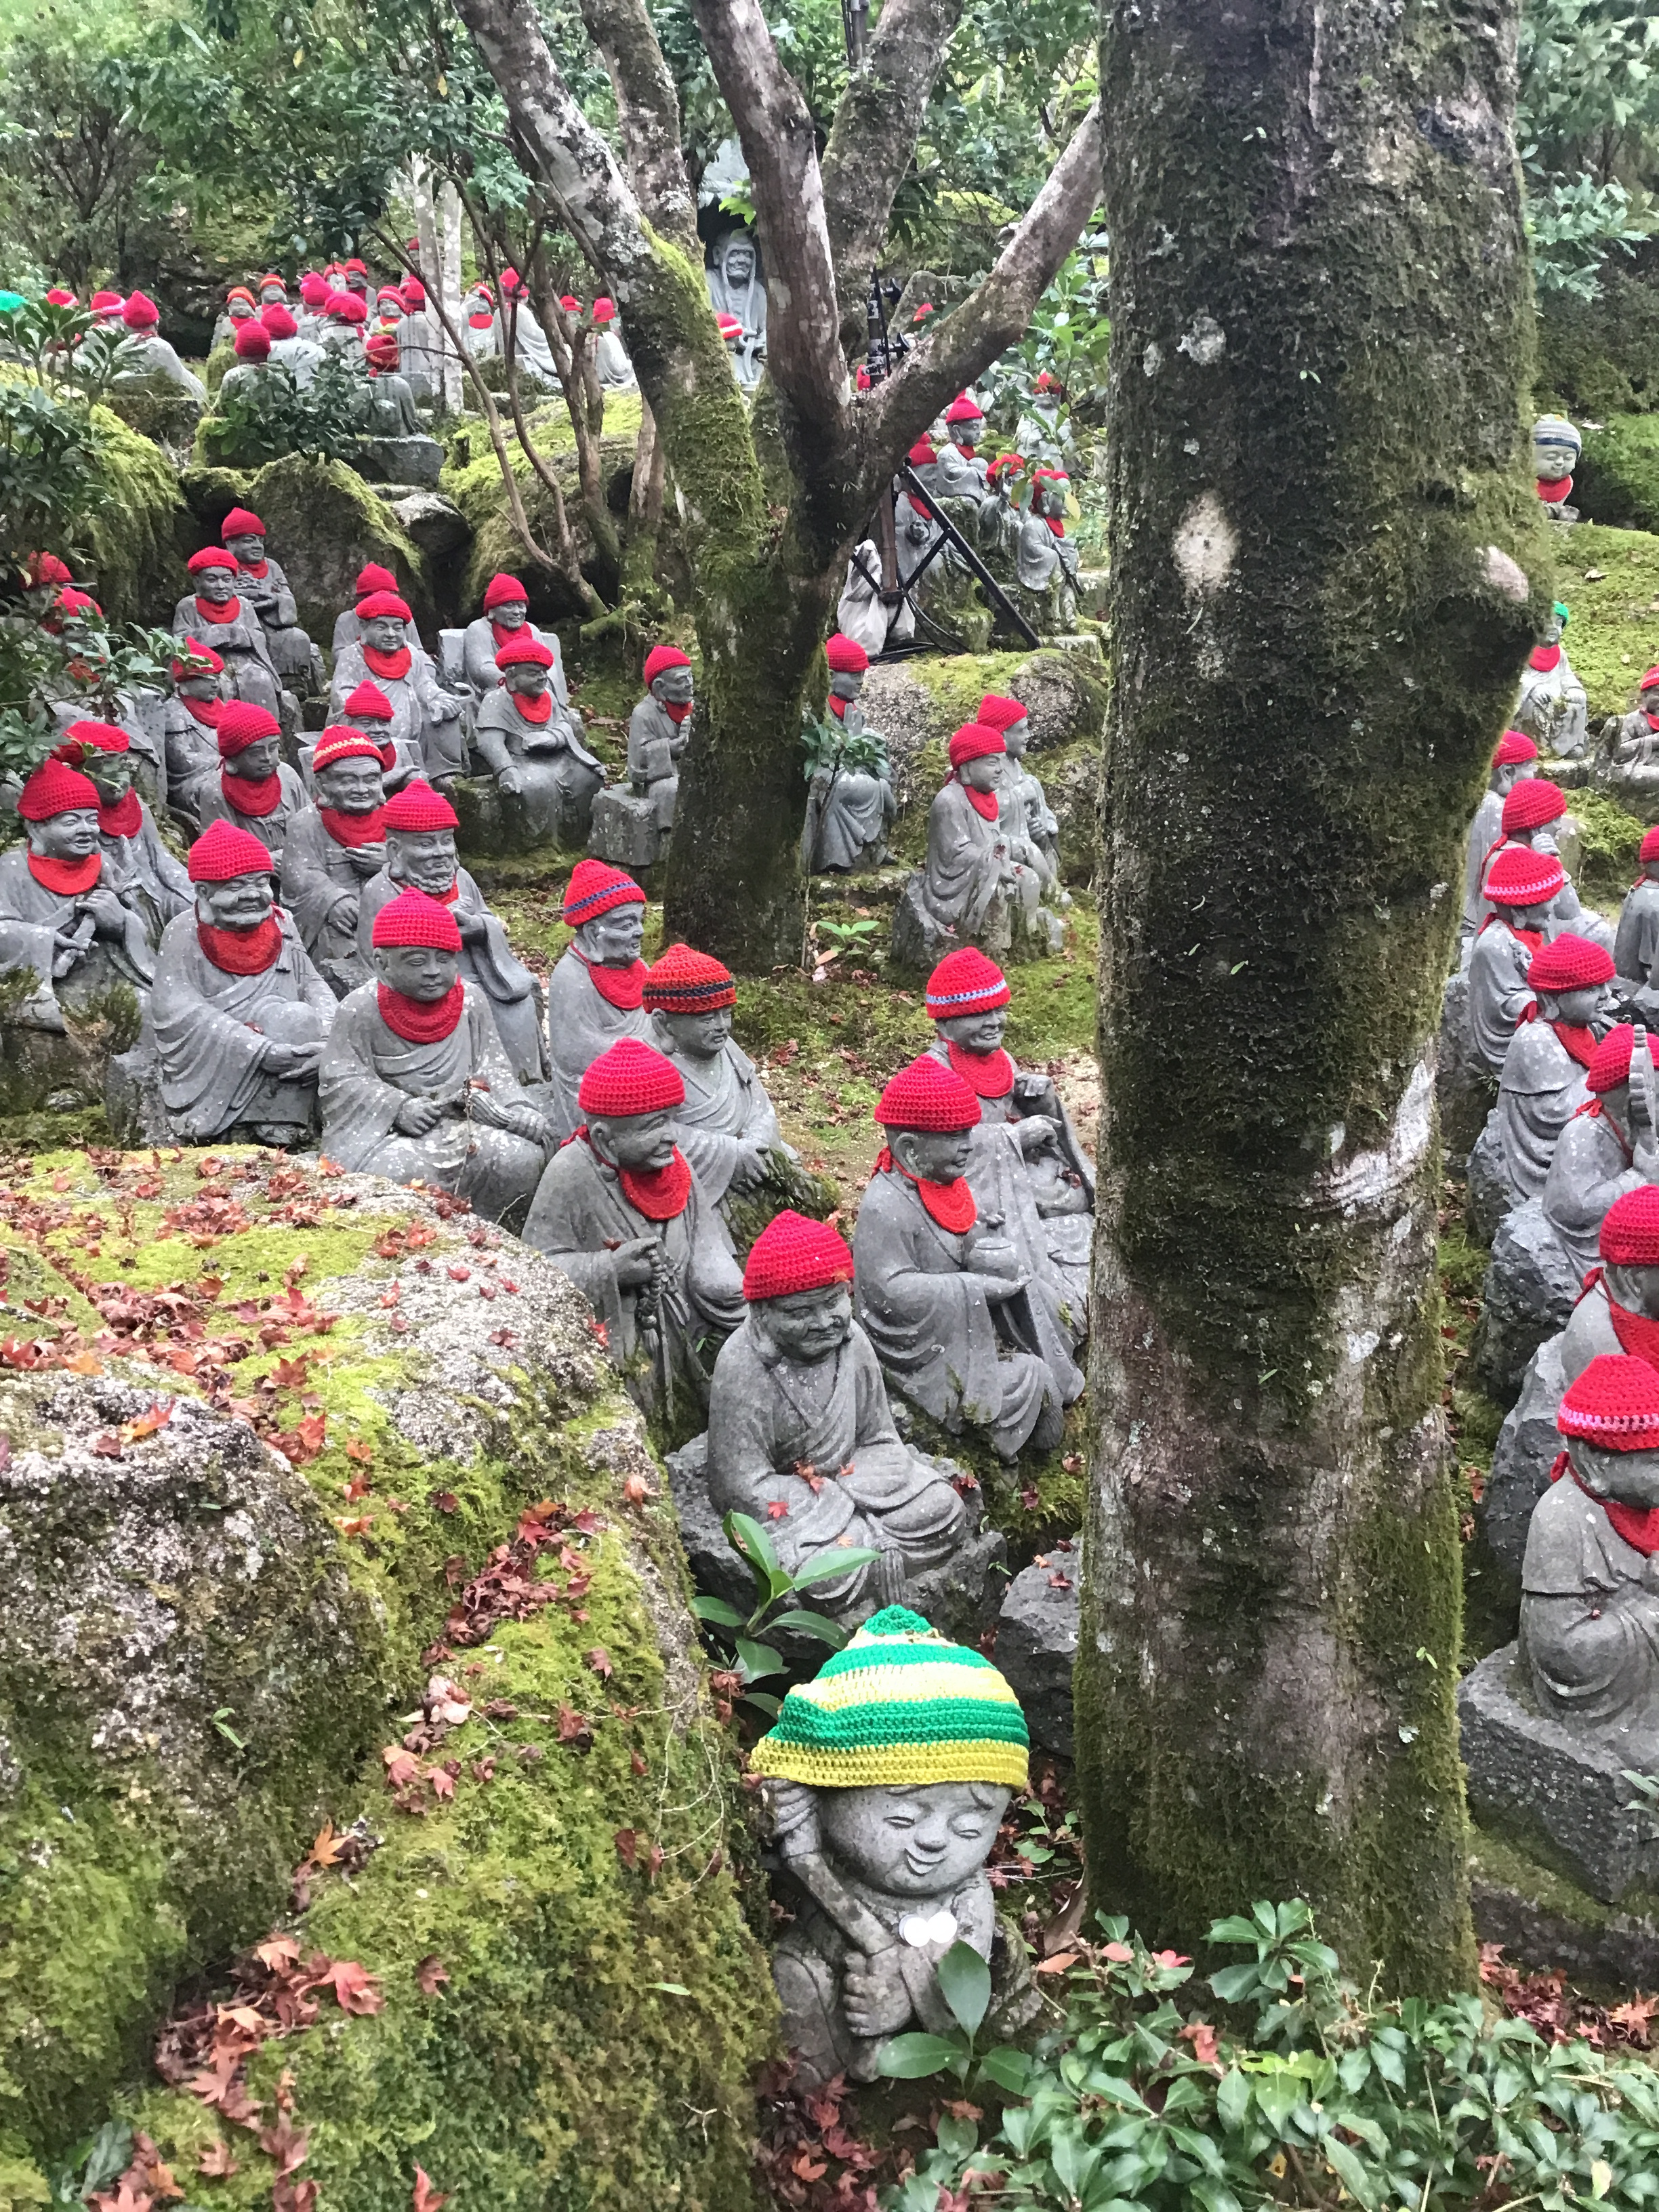 A whole bunch of statues wearing red hats